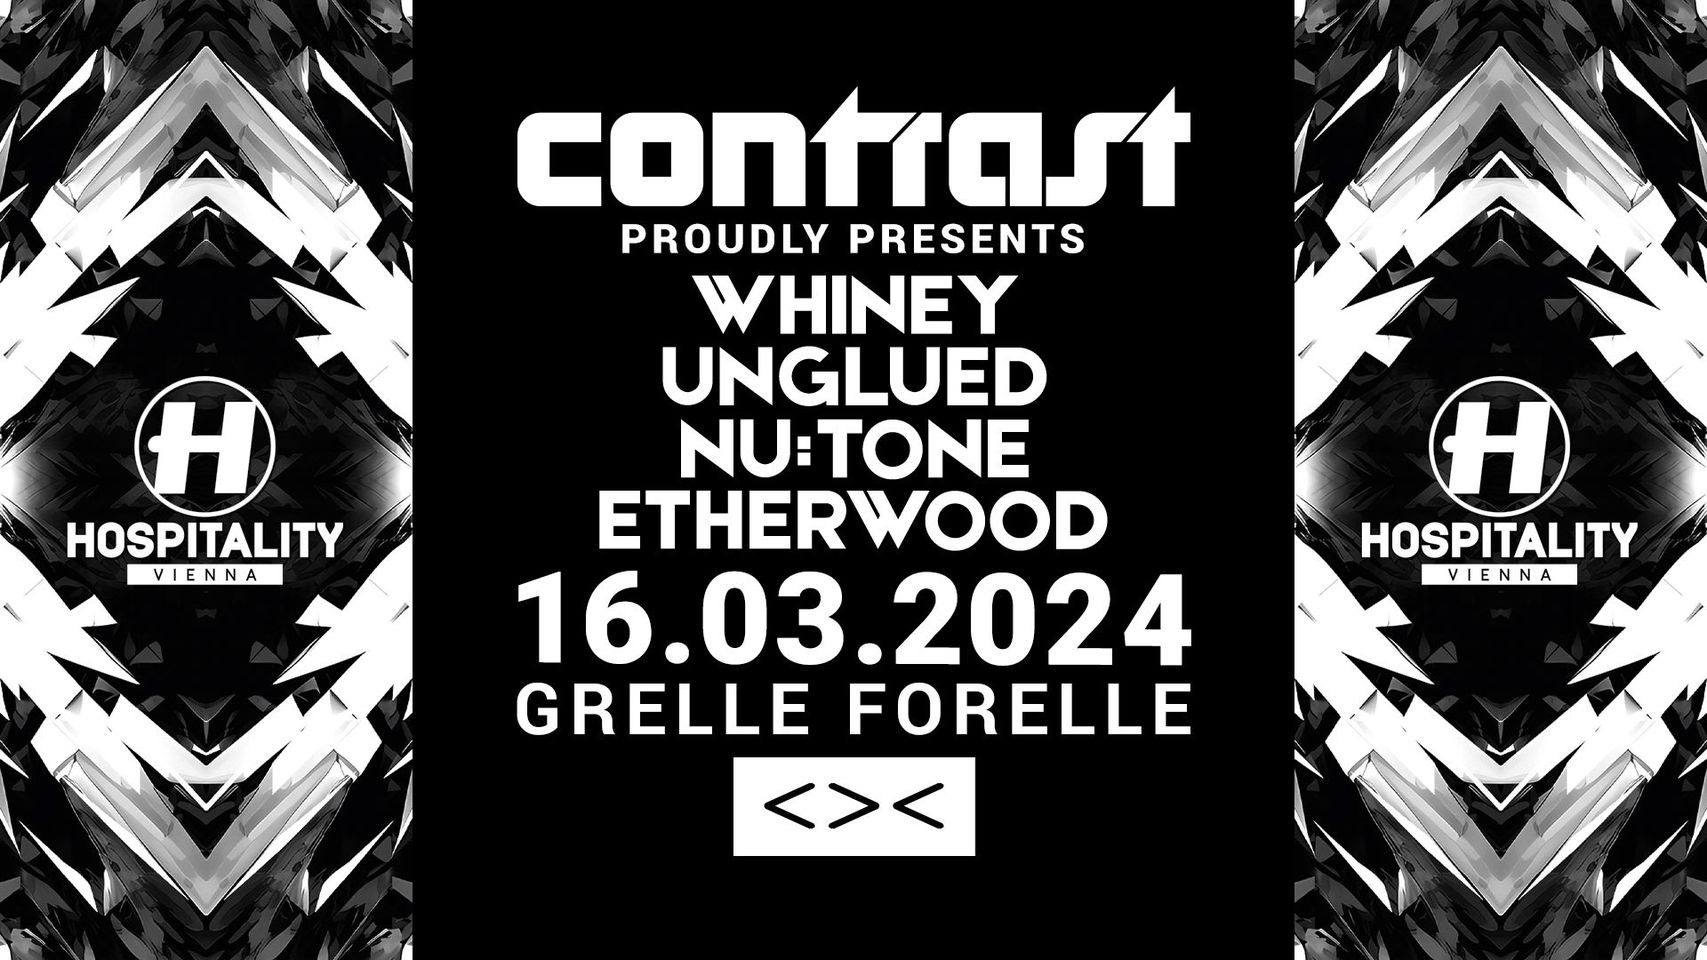 Contrast am 16. March 2024 @ Grelle Forelle.